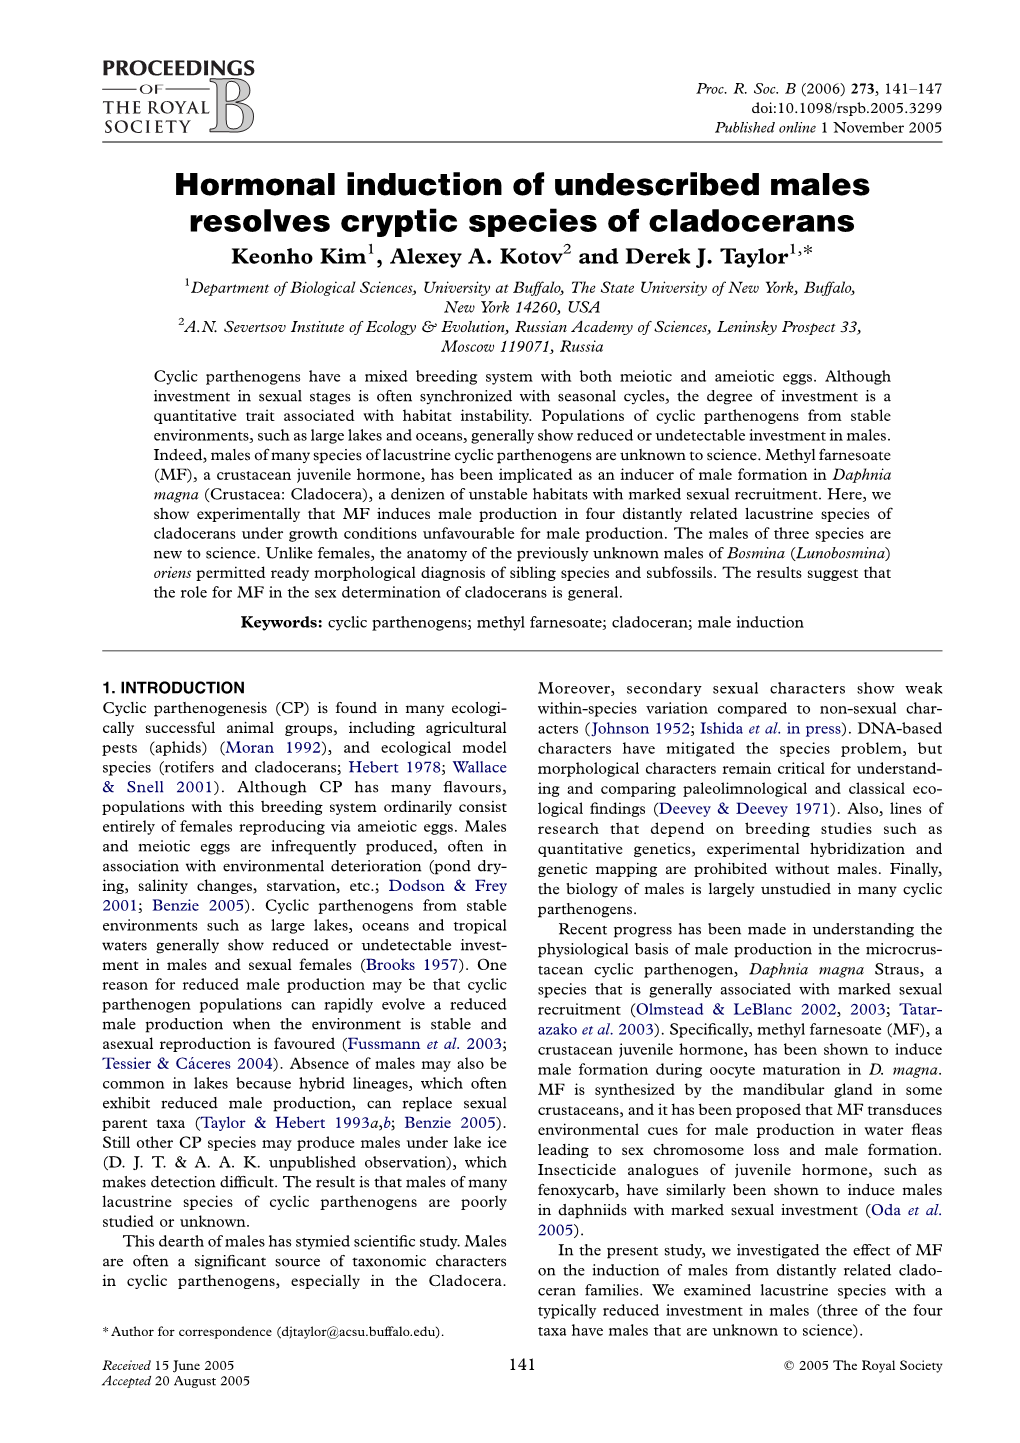 Hormonal Induction of Undescribed Males Resolves Cryptic Species of Cladocerans Keonho Kim1, Alexey A